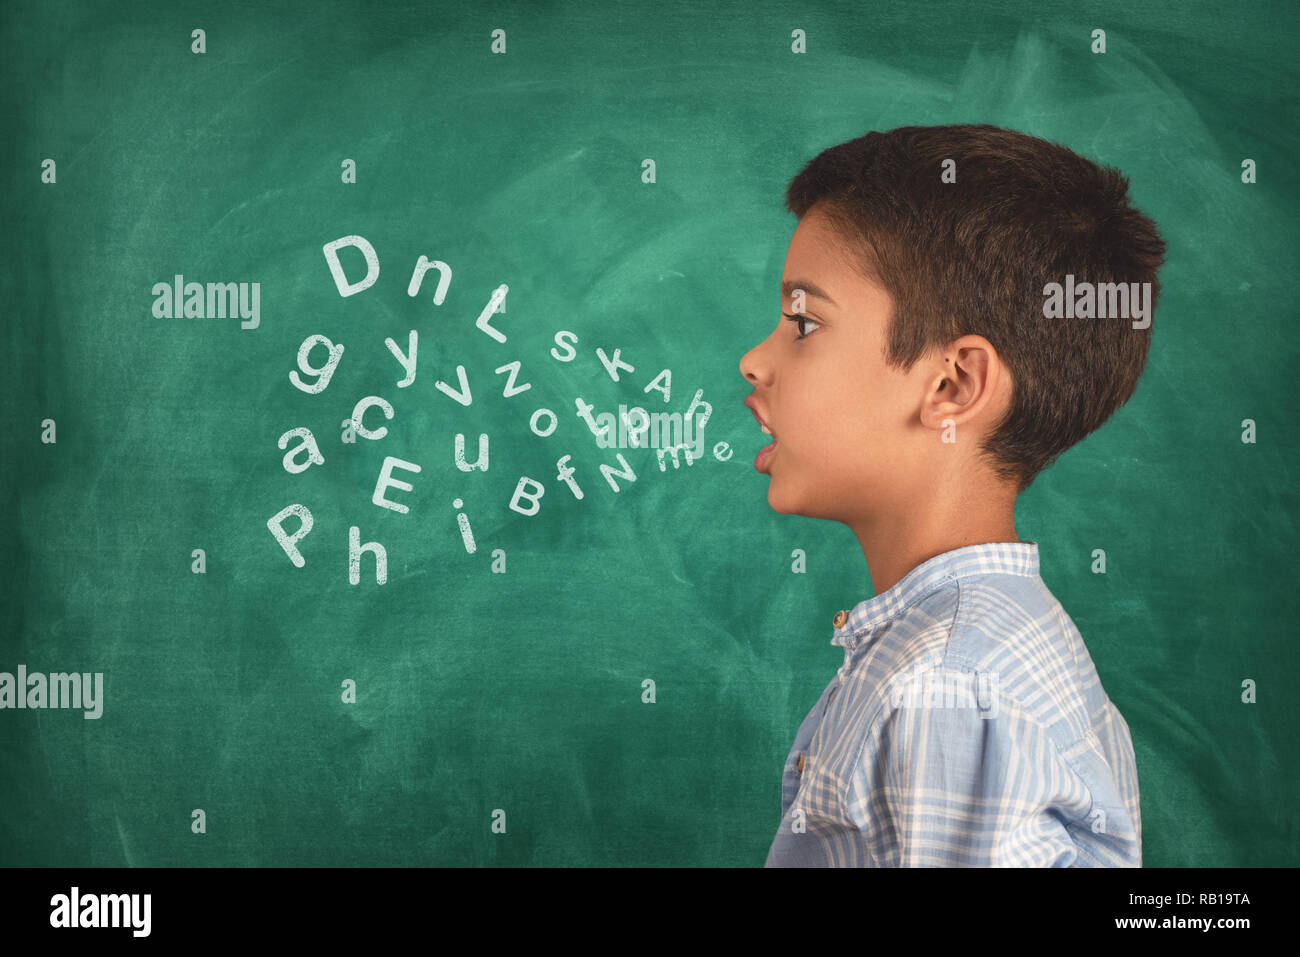 Child speaking and alphabet letters coming out of his mouth Stock Photo